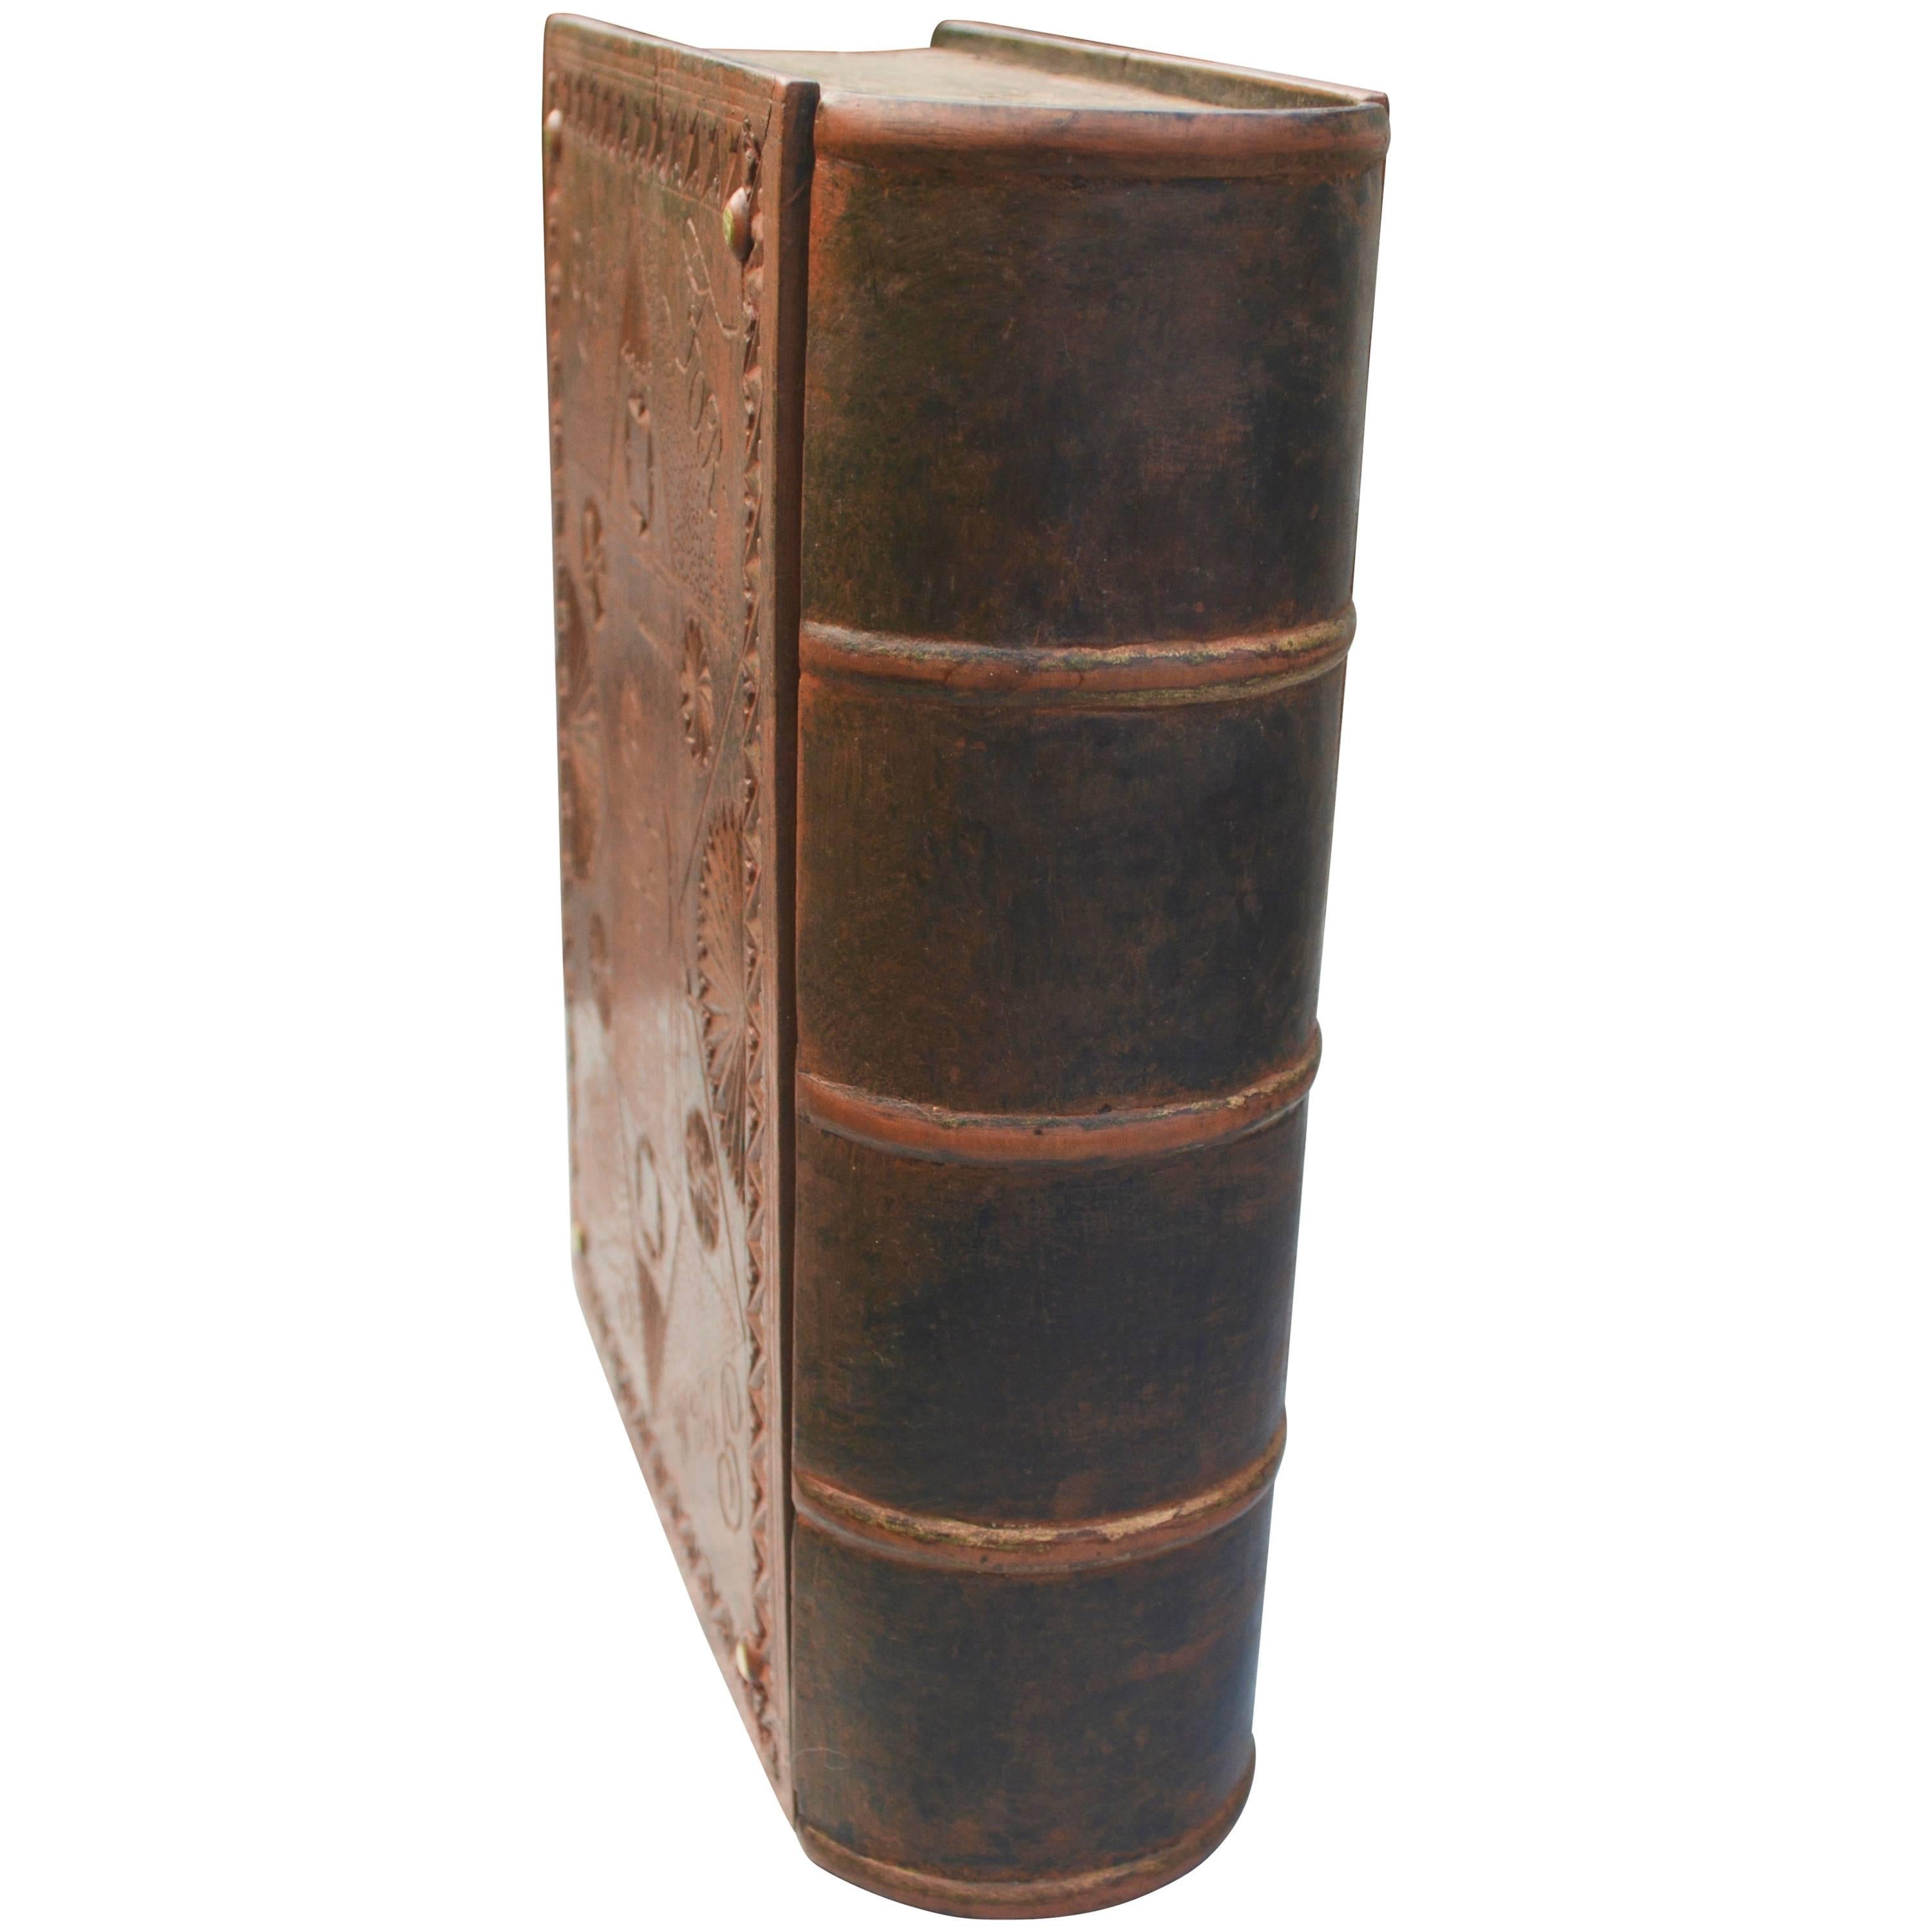 19th Century Wooden Bible Box "Forget Me Not" with Secret Concealed Compartment